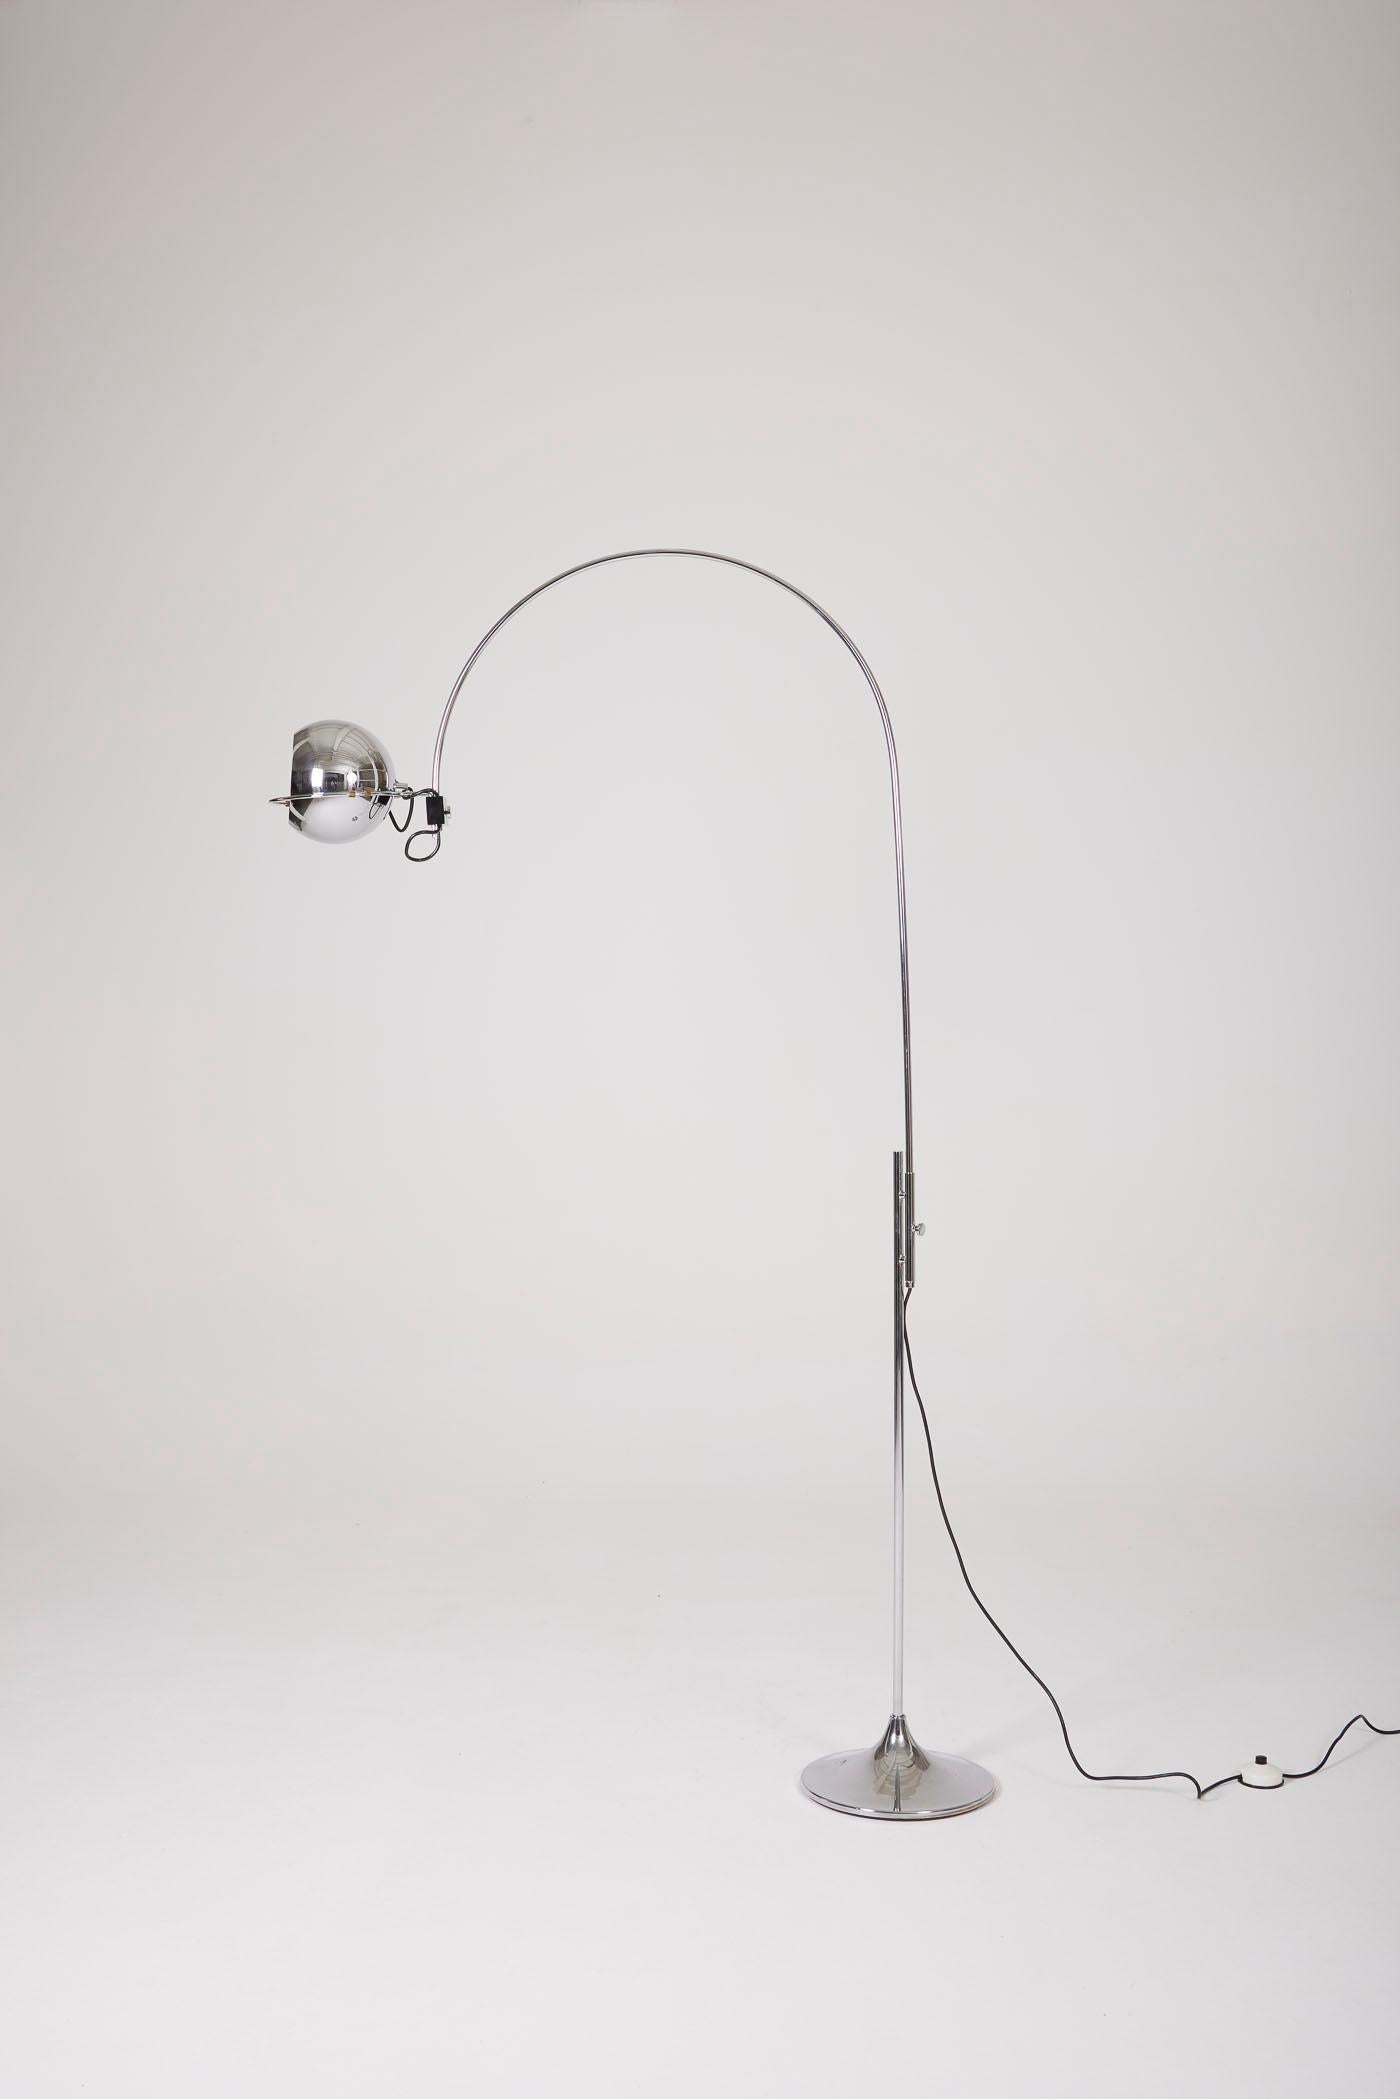 Floor lamp 'eye ball' attributed to the Italian designer Goffredo Reggiani, 1970s. Arc-shaped chromed metal base with an adjustable reflector. In perfect original condition.
DV487